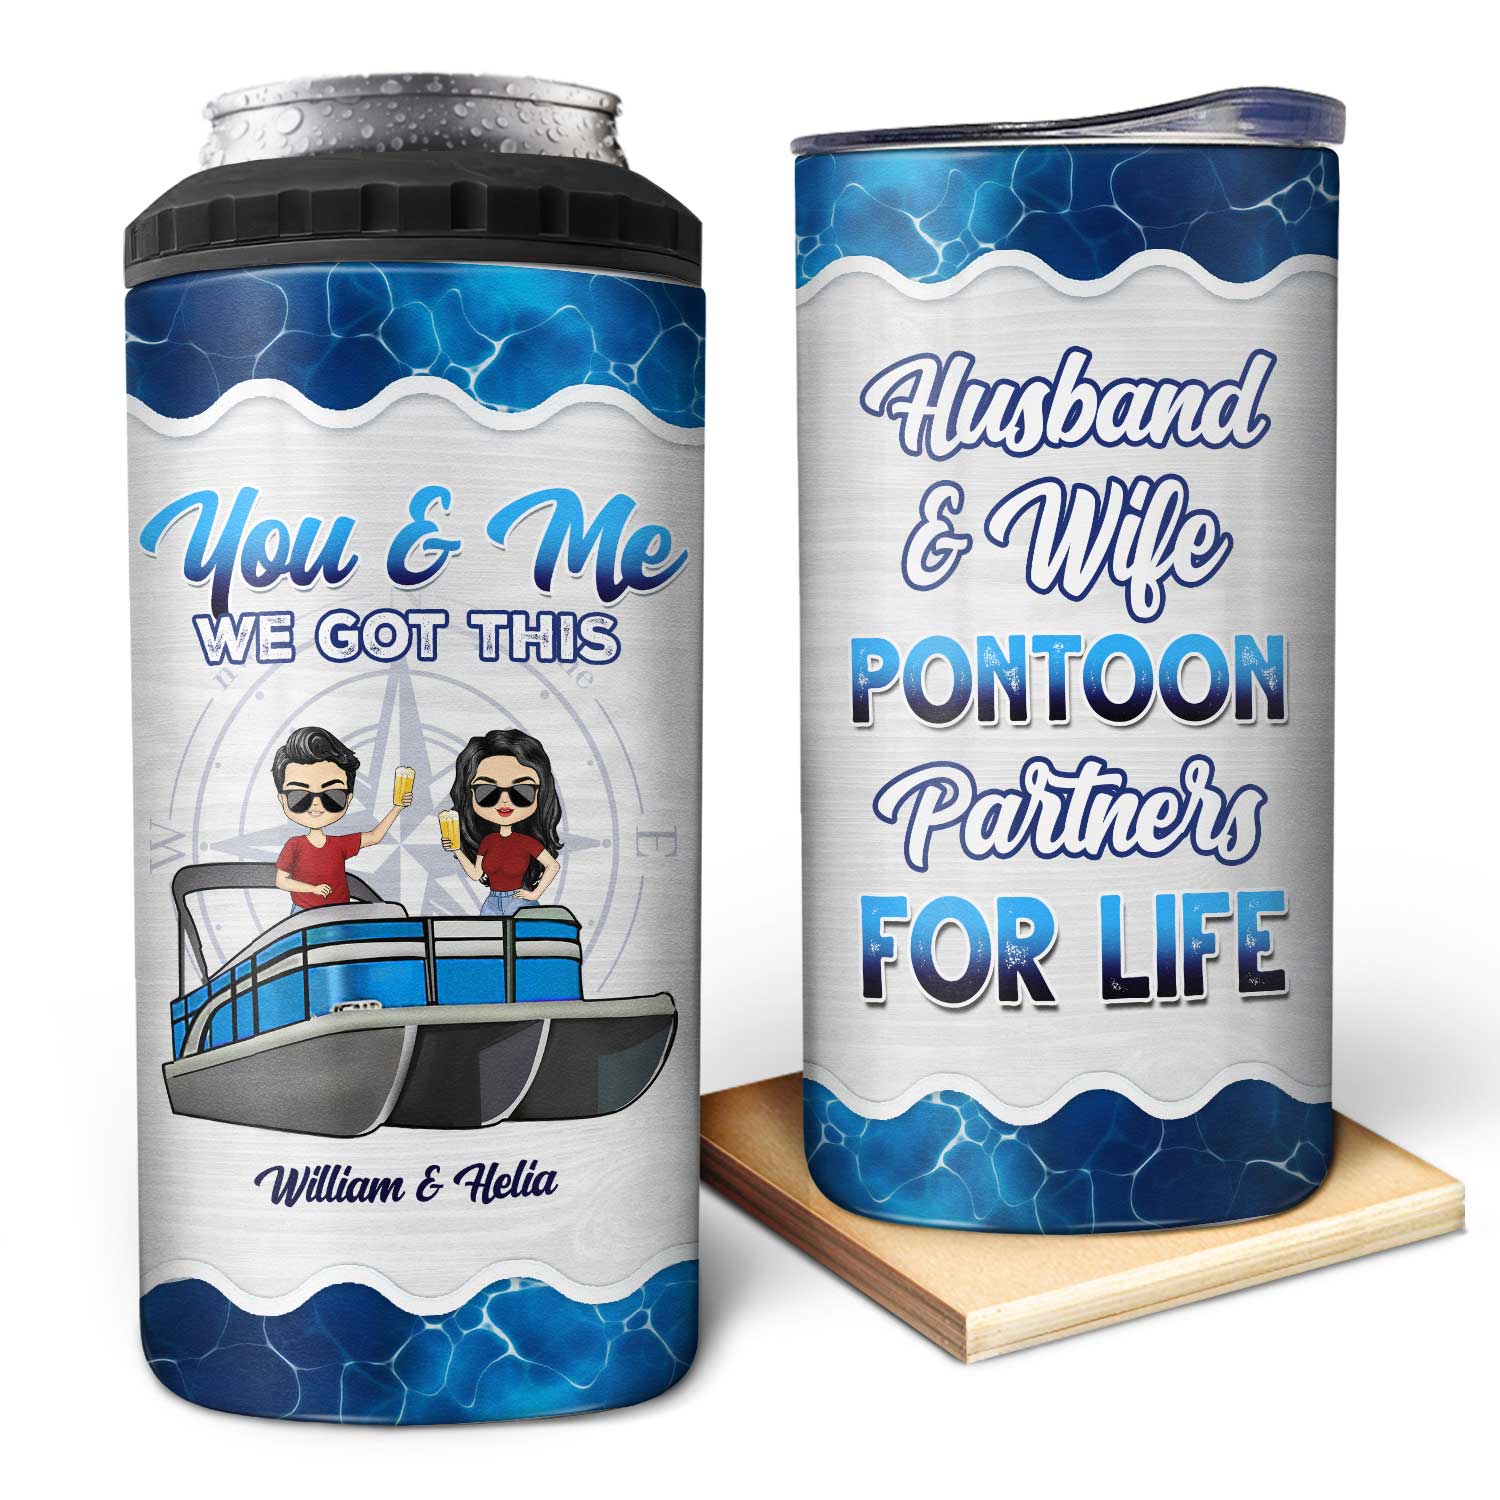 Boating Husband & Wife Pontoon Partners For Life - Traveling, Cruising Gift For Couples, Pontooning Lovers, Lake Lovers, Travelers - Personalized Custom 4 In 1 Can Cooler Tumbler